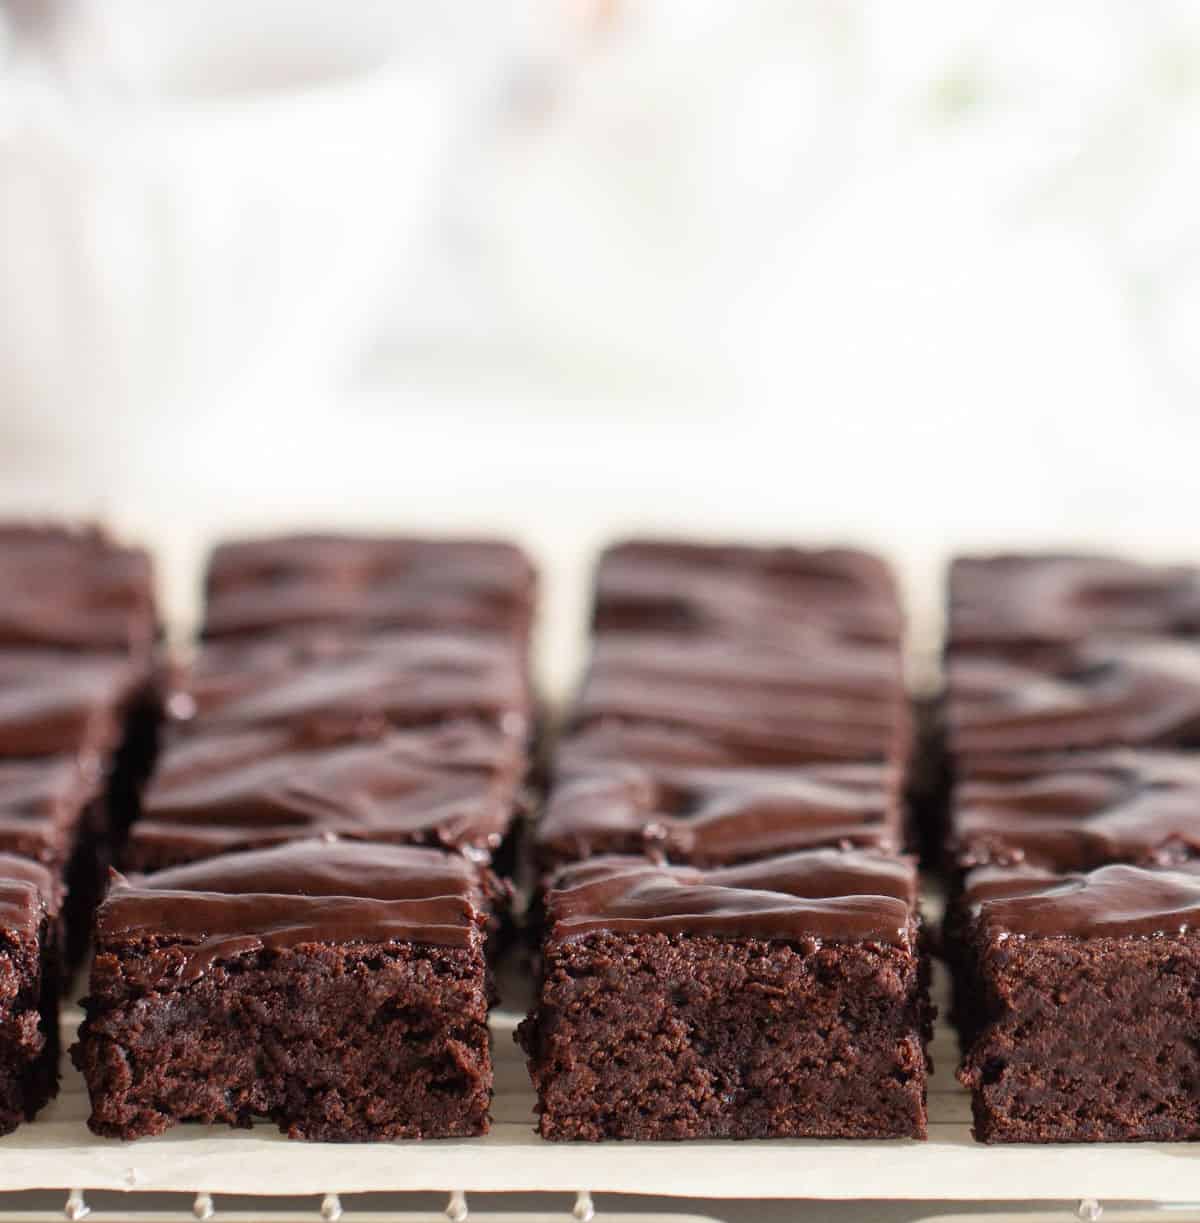 Rows of ganache topped brownie squares on parchment paper. White background.